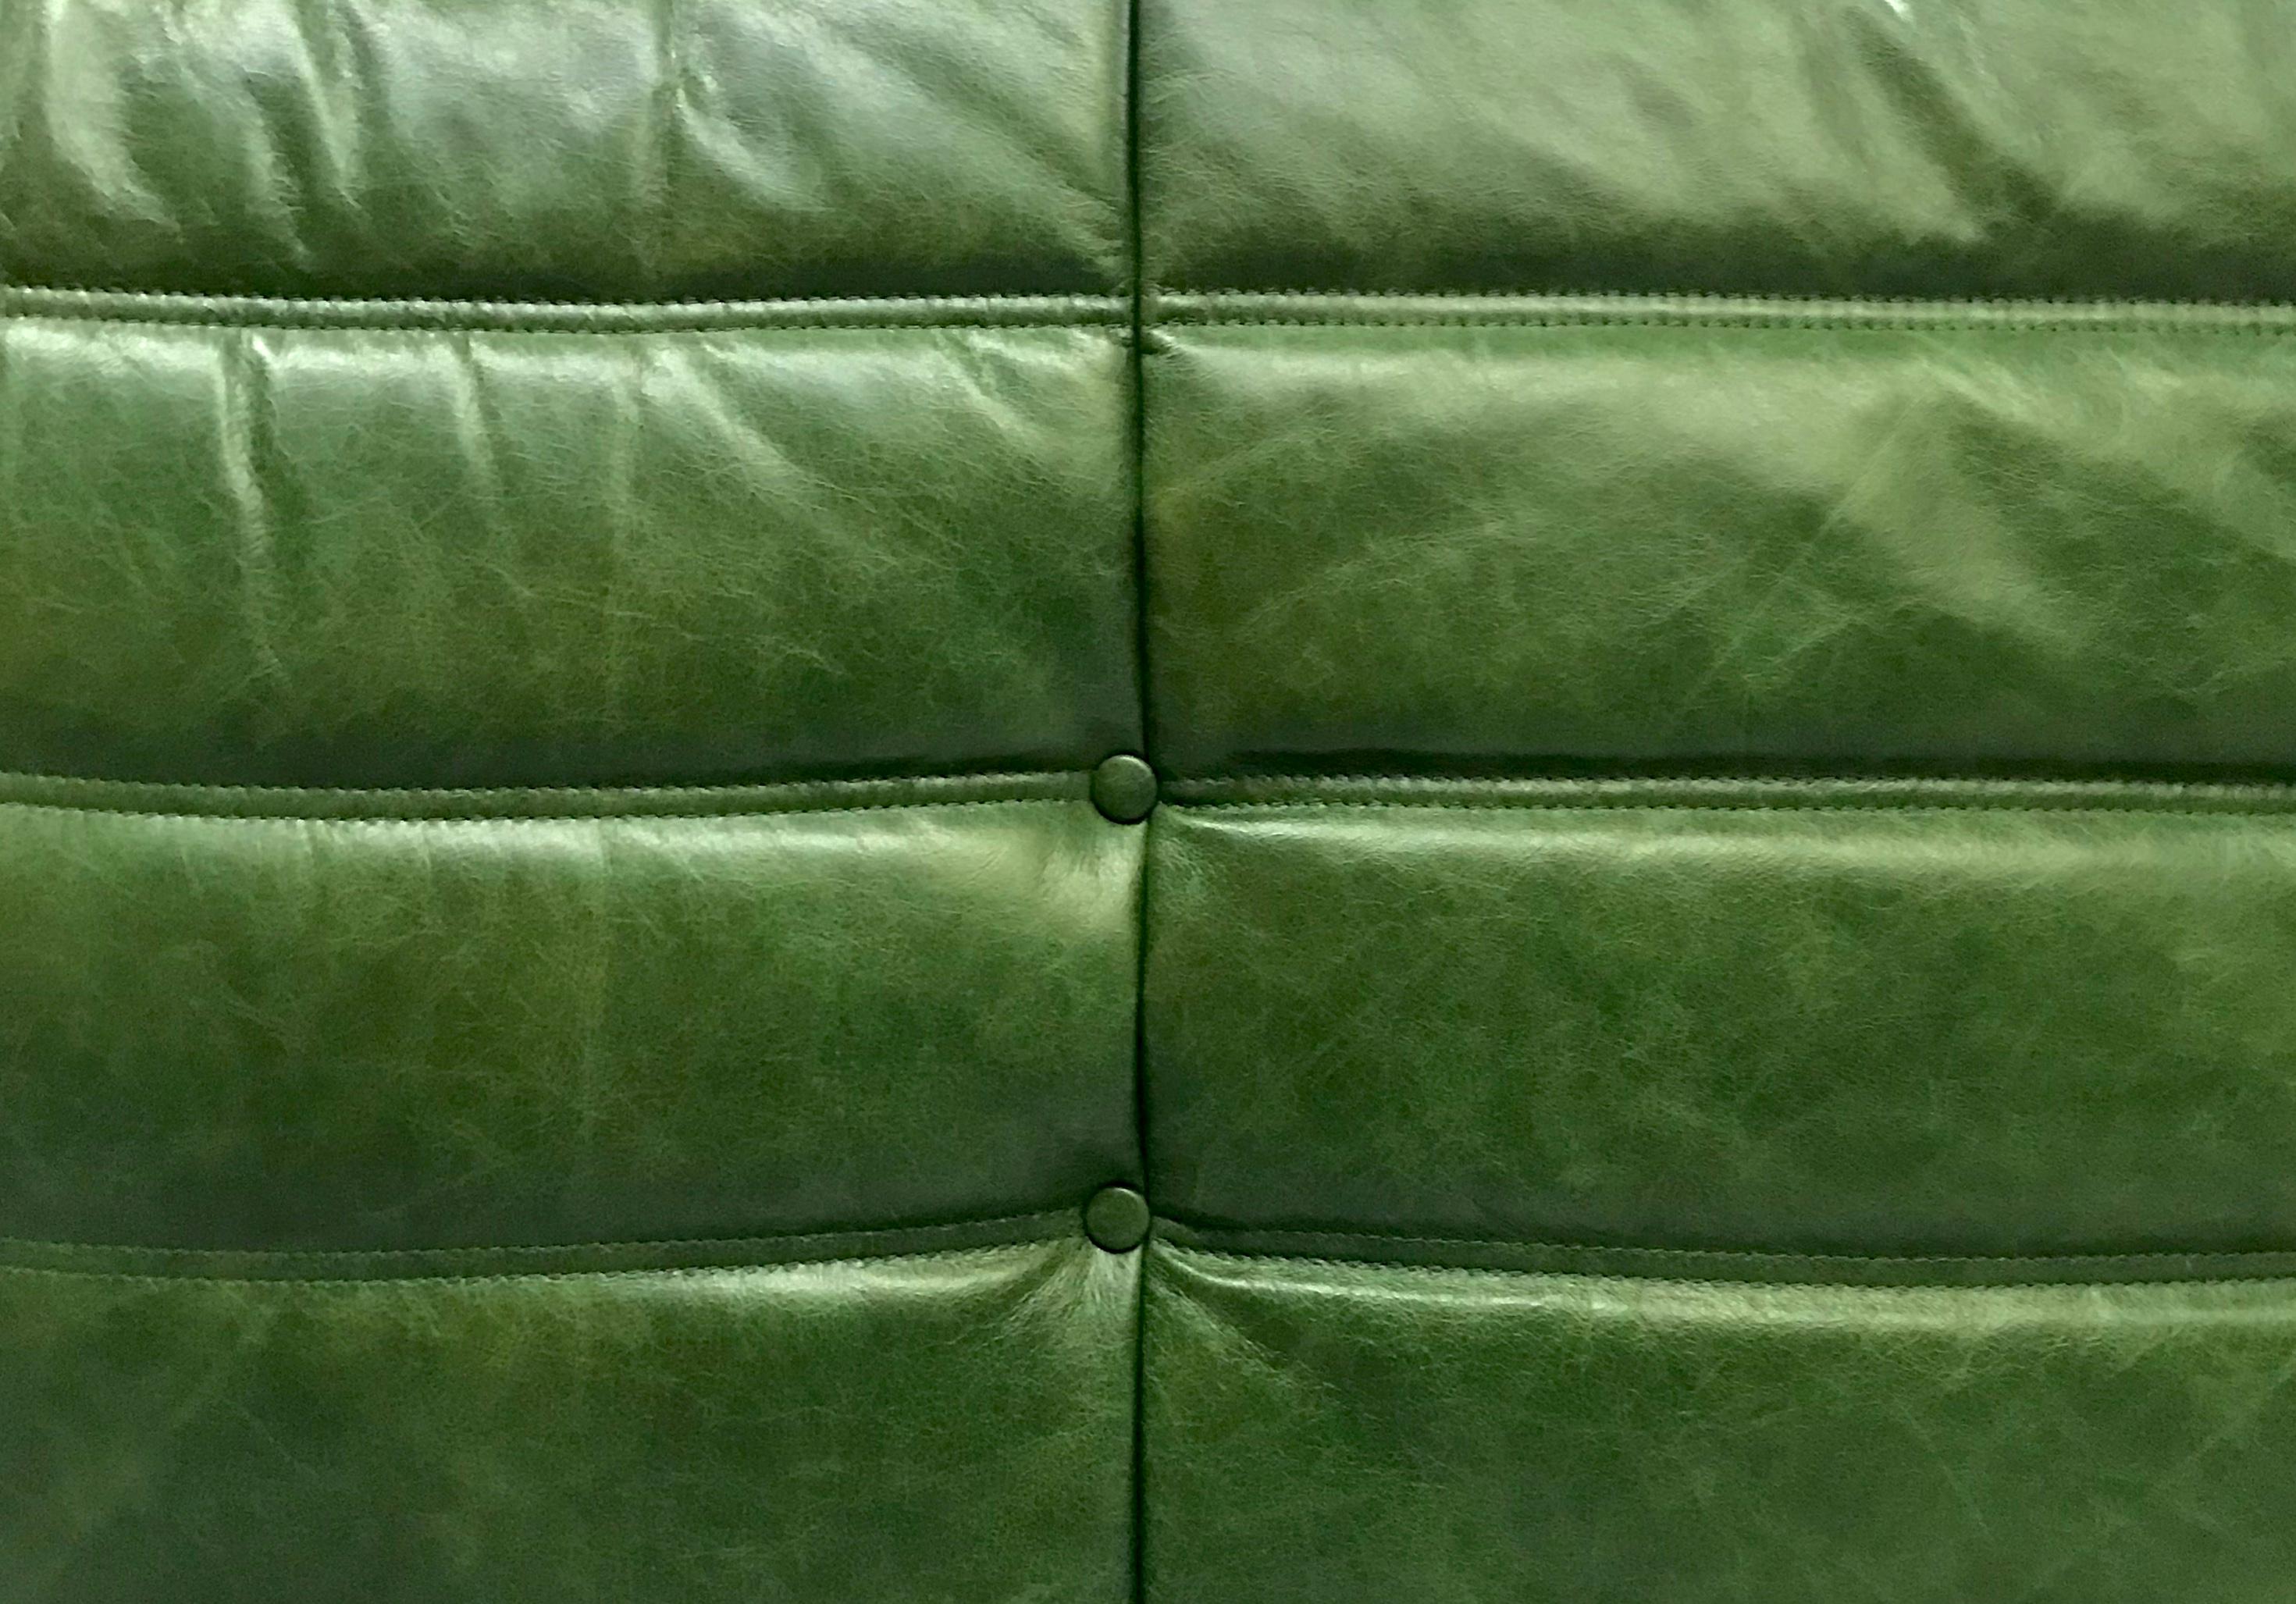 Mid-Century Modern French  Togo Sofa in Green  Leather by Michel Ducaroy for Ligne Roset. For Sale